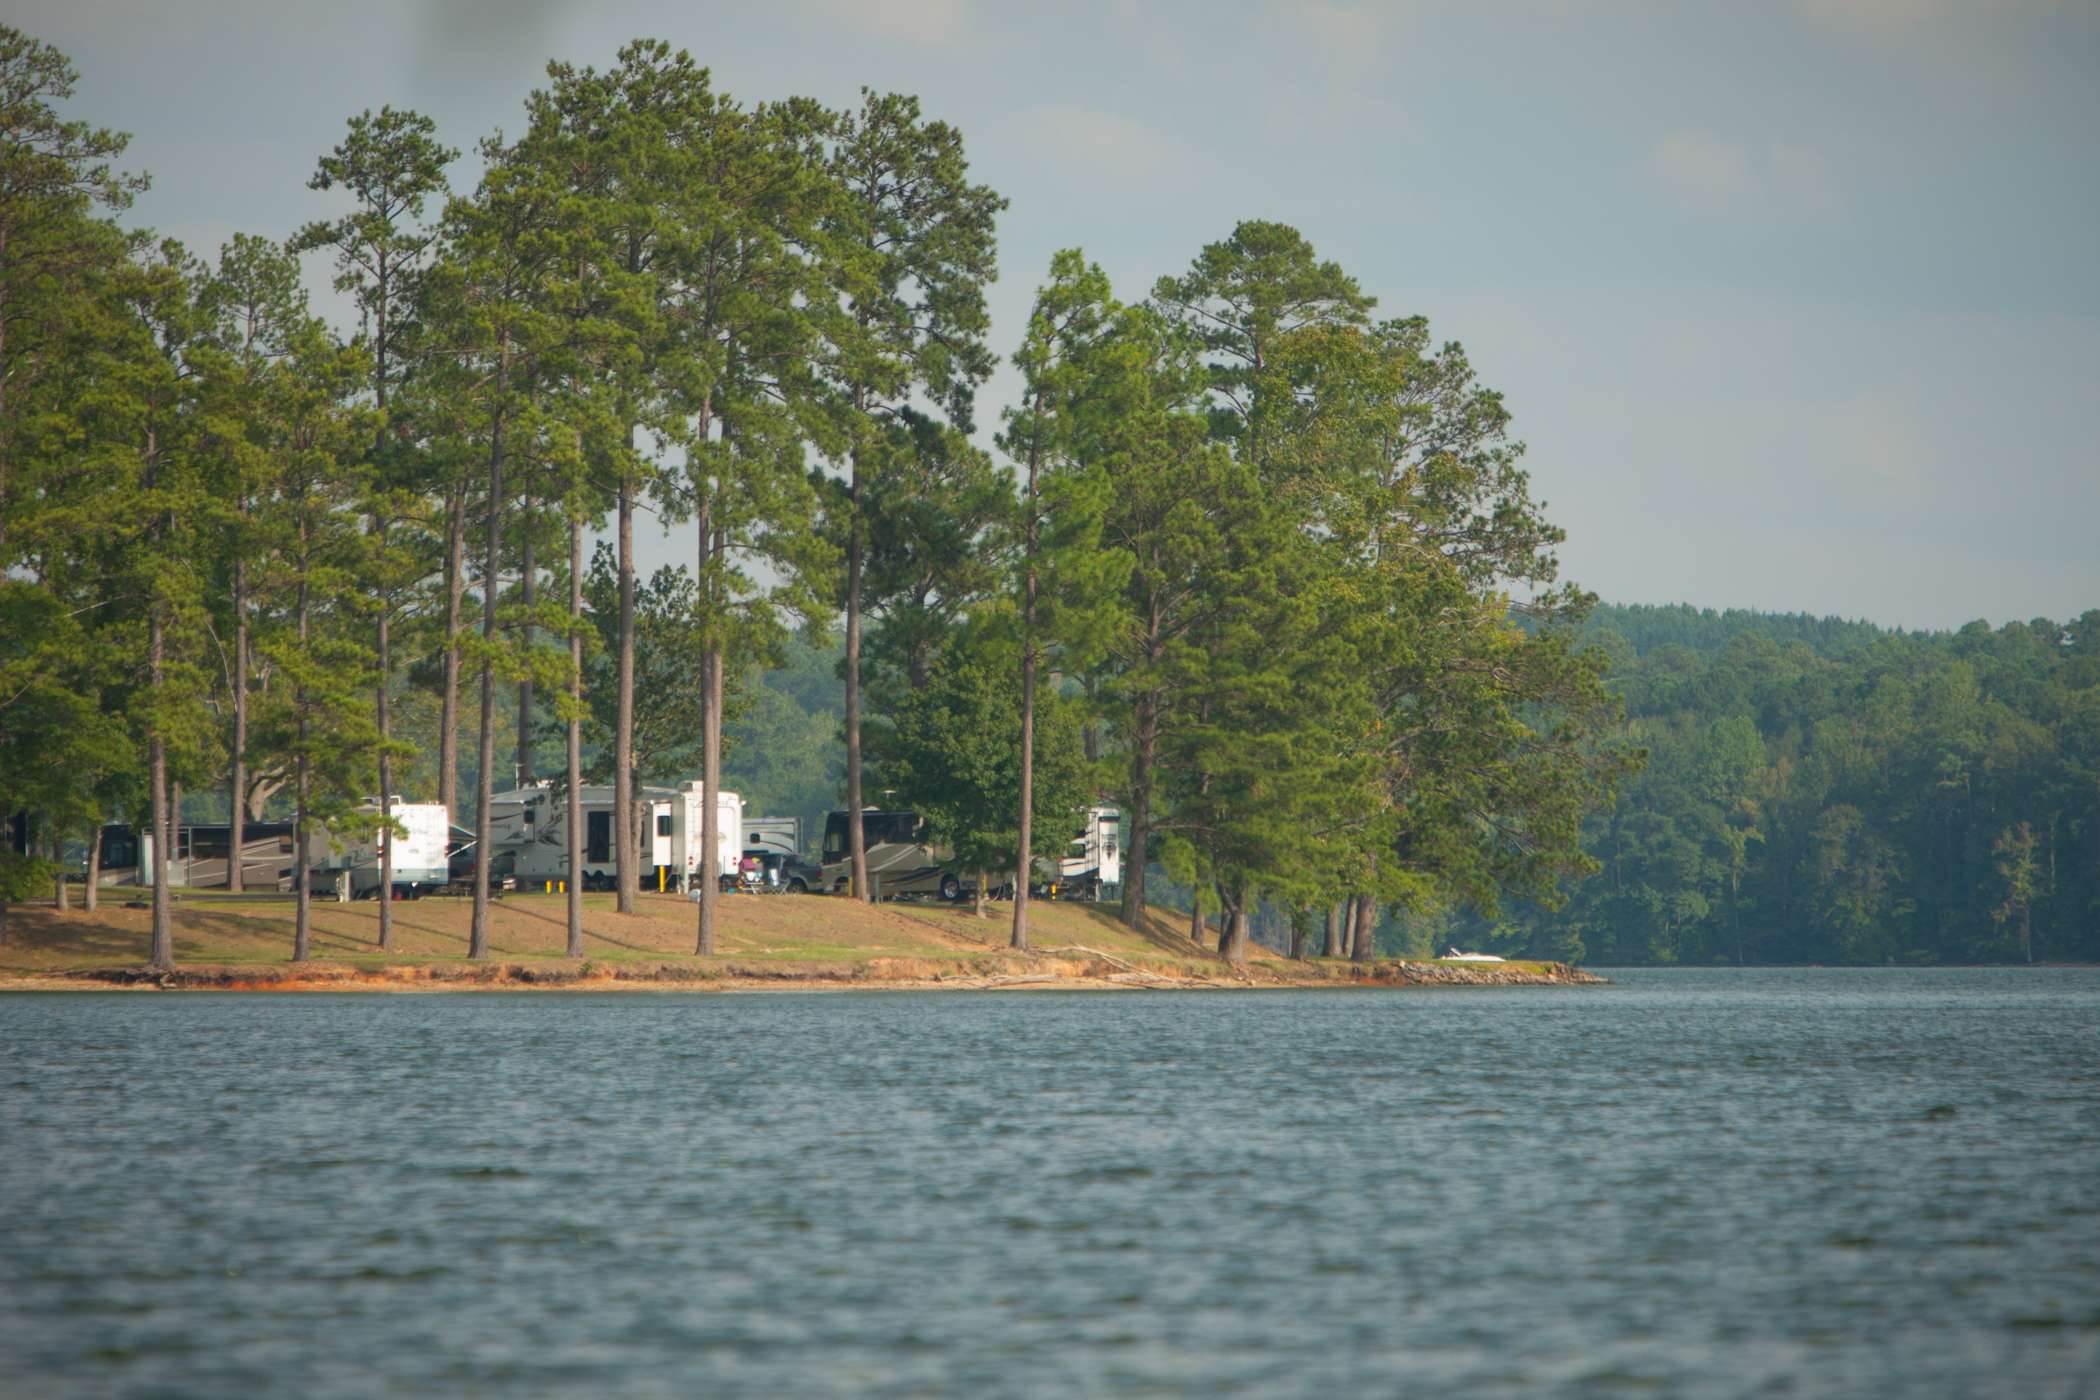 <h4>Wind Creek State Park, Alabama</h4>
Cabins, campsites, ziplines, mini-golf and horseback riding all await at Wind Creek State Park. This family-friendly, wooded retreat on the shores of Lake Martin has an astounding 586 slots along with a pizza and sandwich shop, plus a full-service marina. The campground offers standard Jon boat rentals along with bass boats, making it truly one of the most bass angler friendly campgrounds in the nation. 
